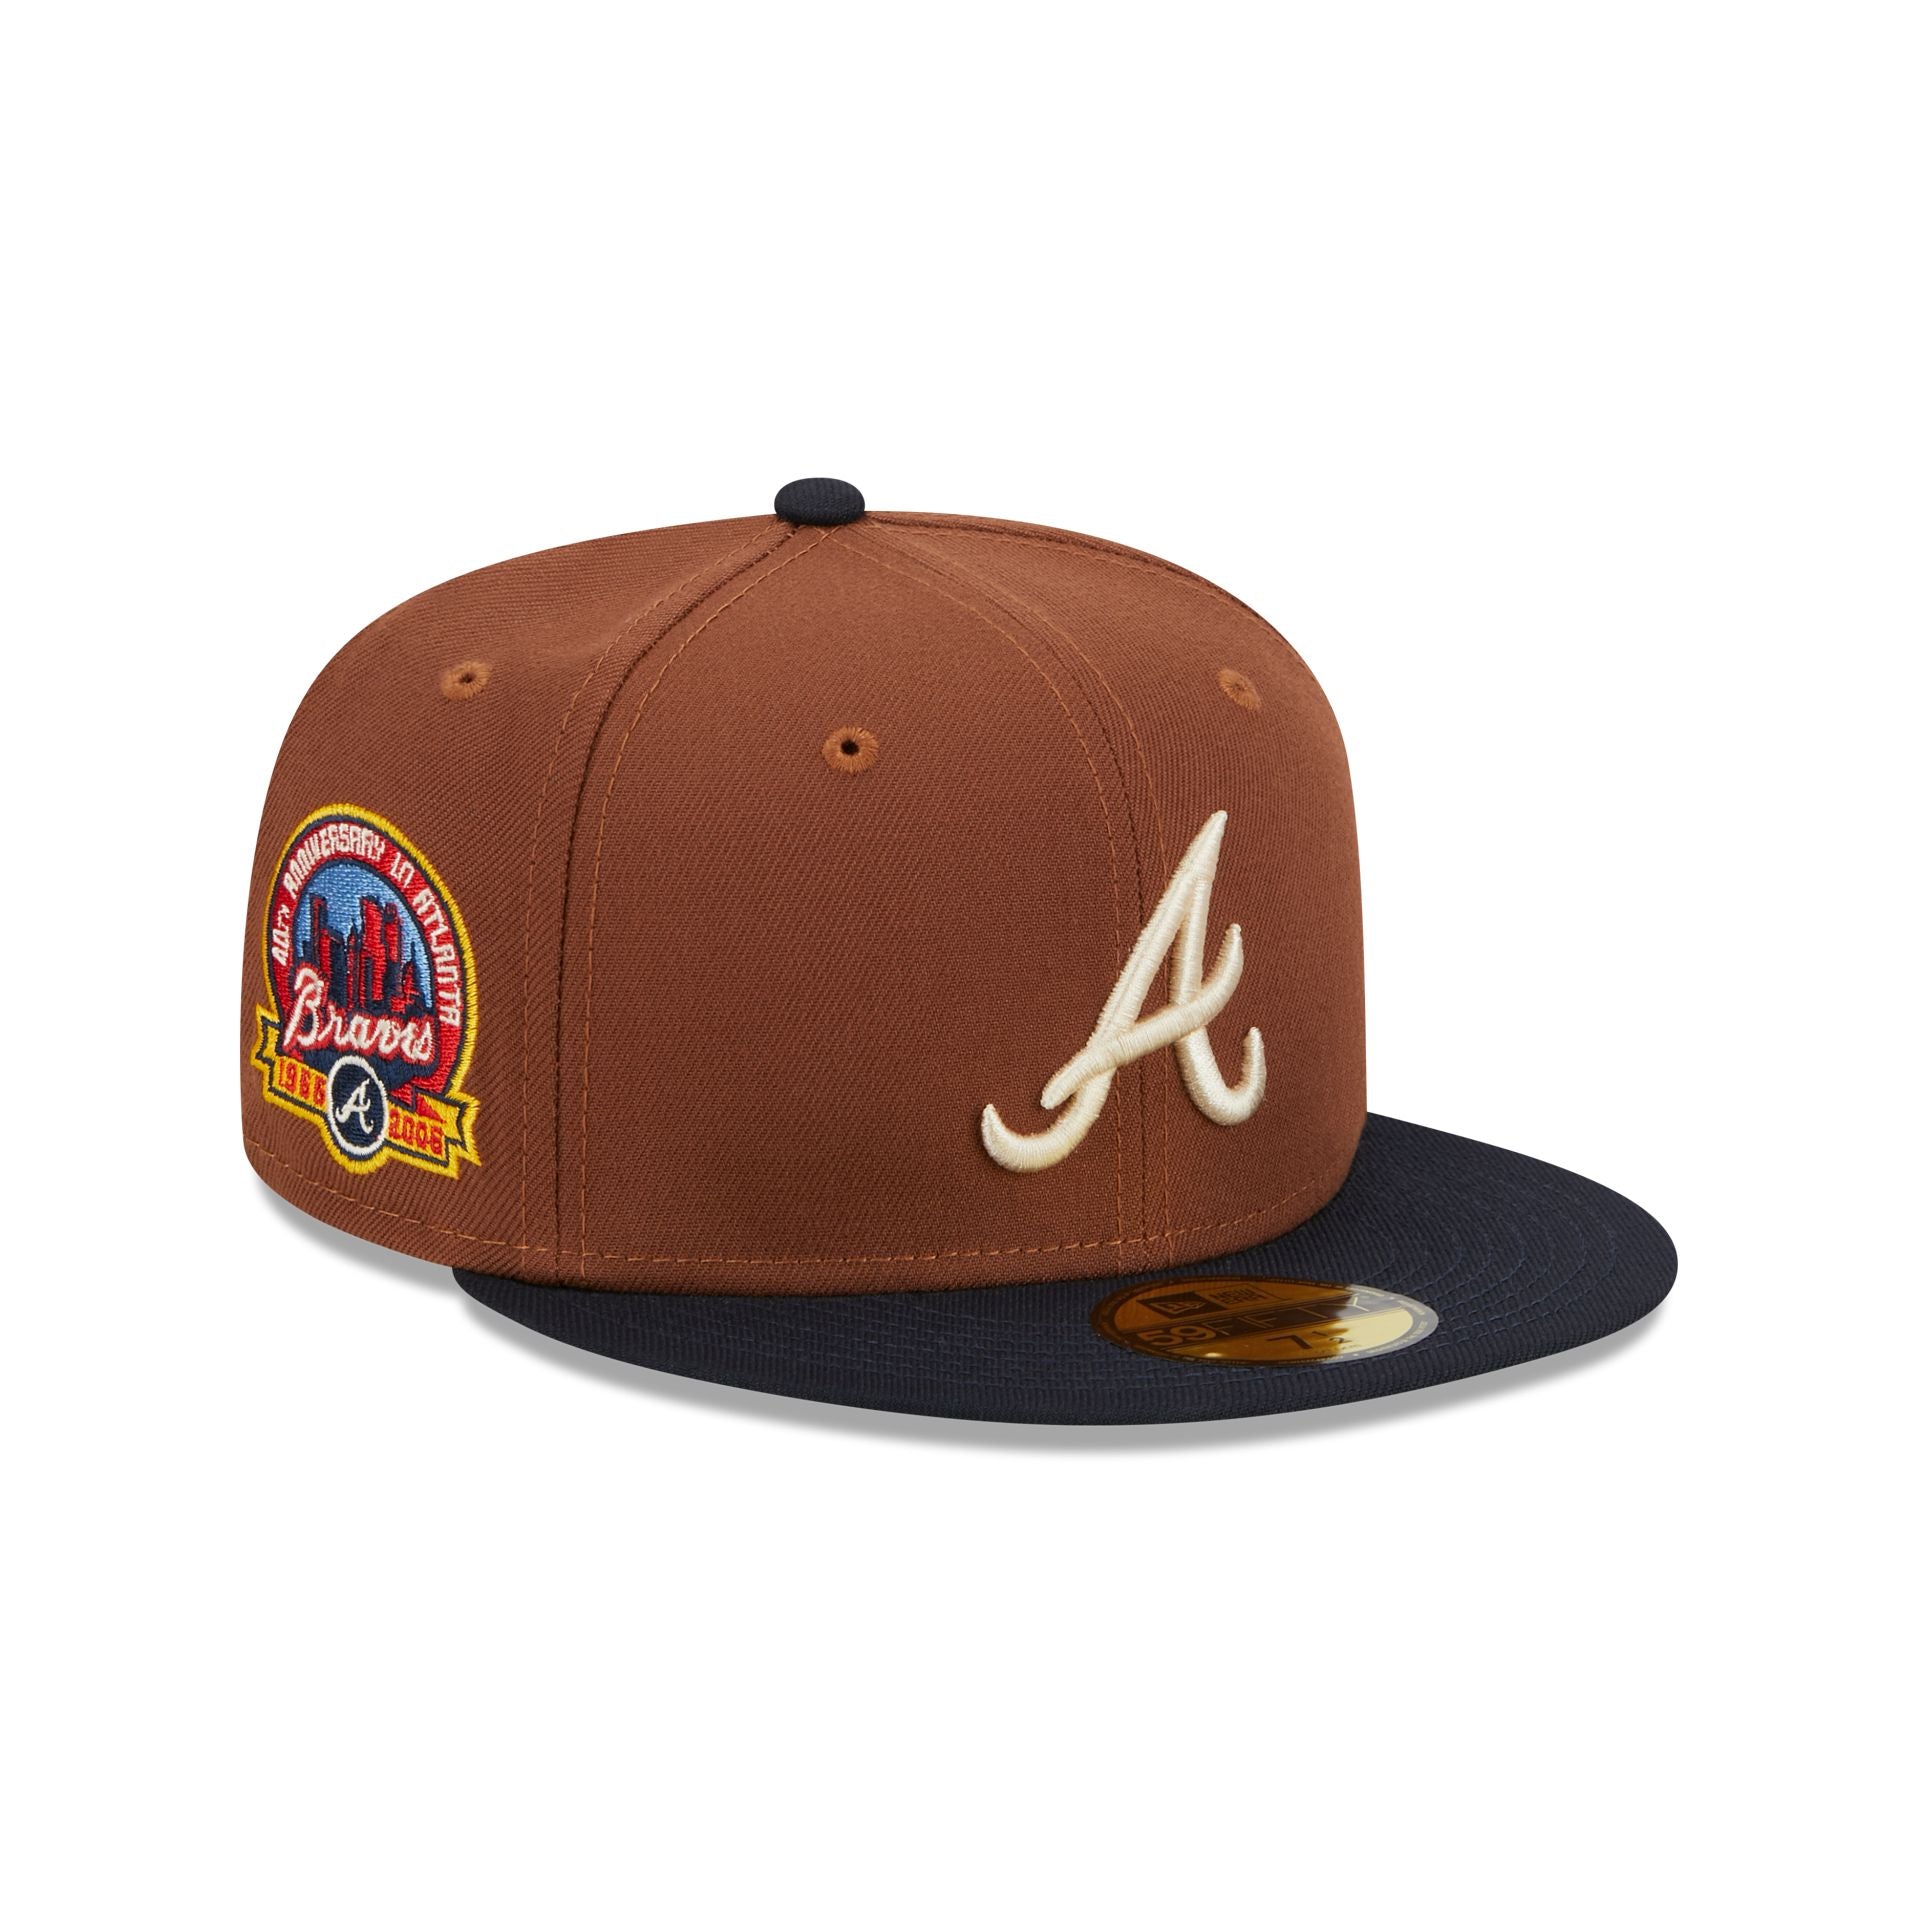 Men's New Era Gray/Blue Atlanta Braves Dolphin 59FIFTY Fitted Hat